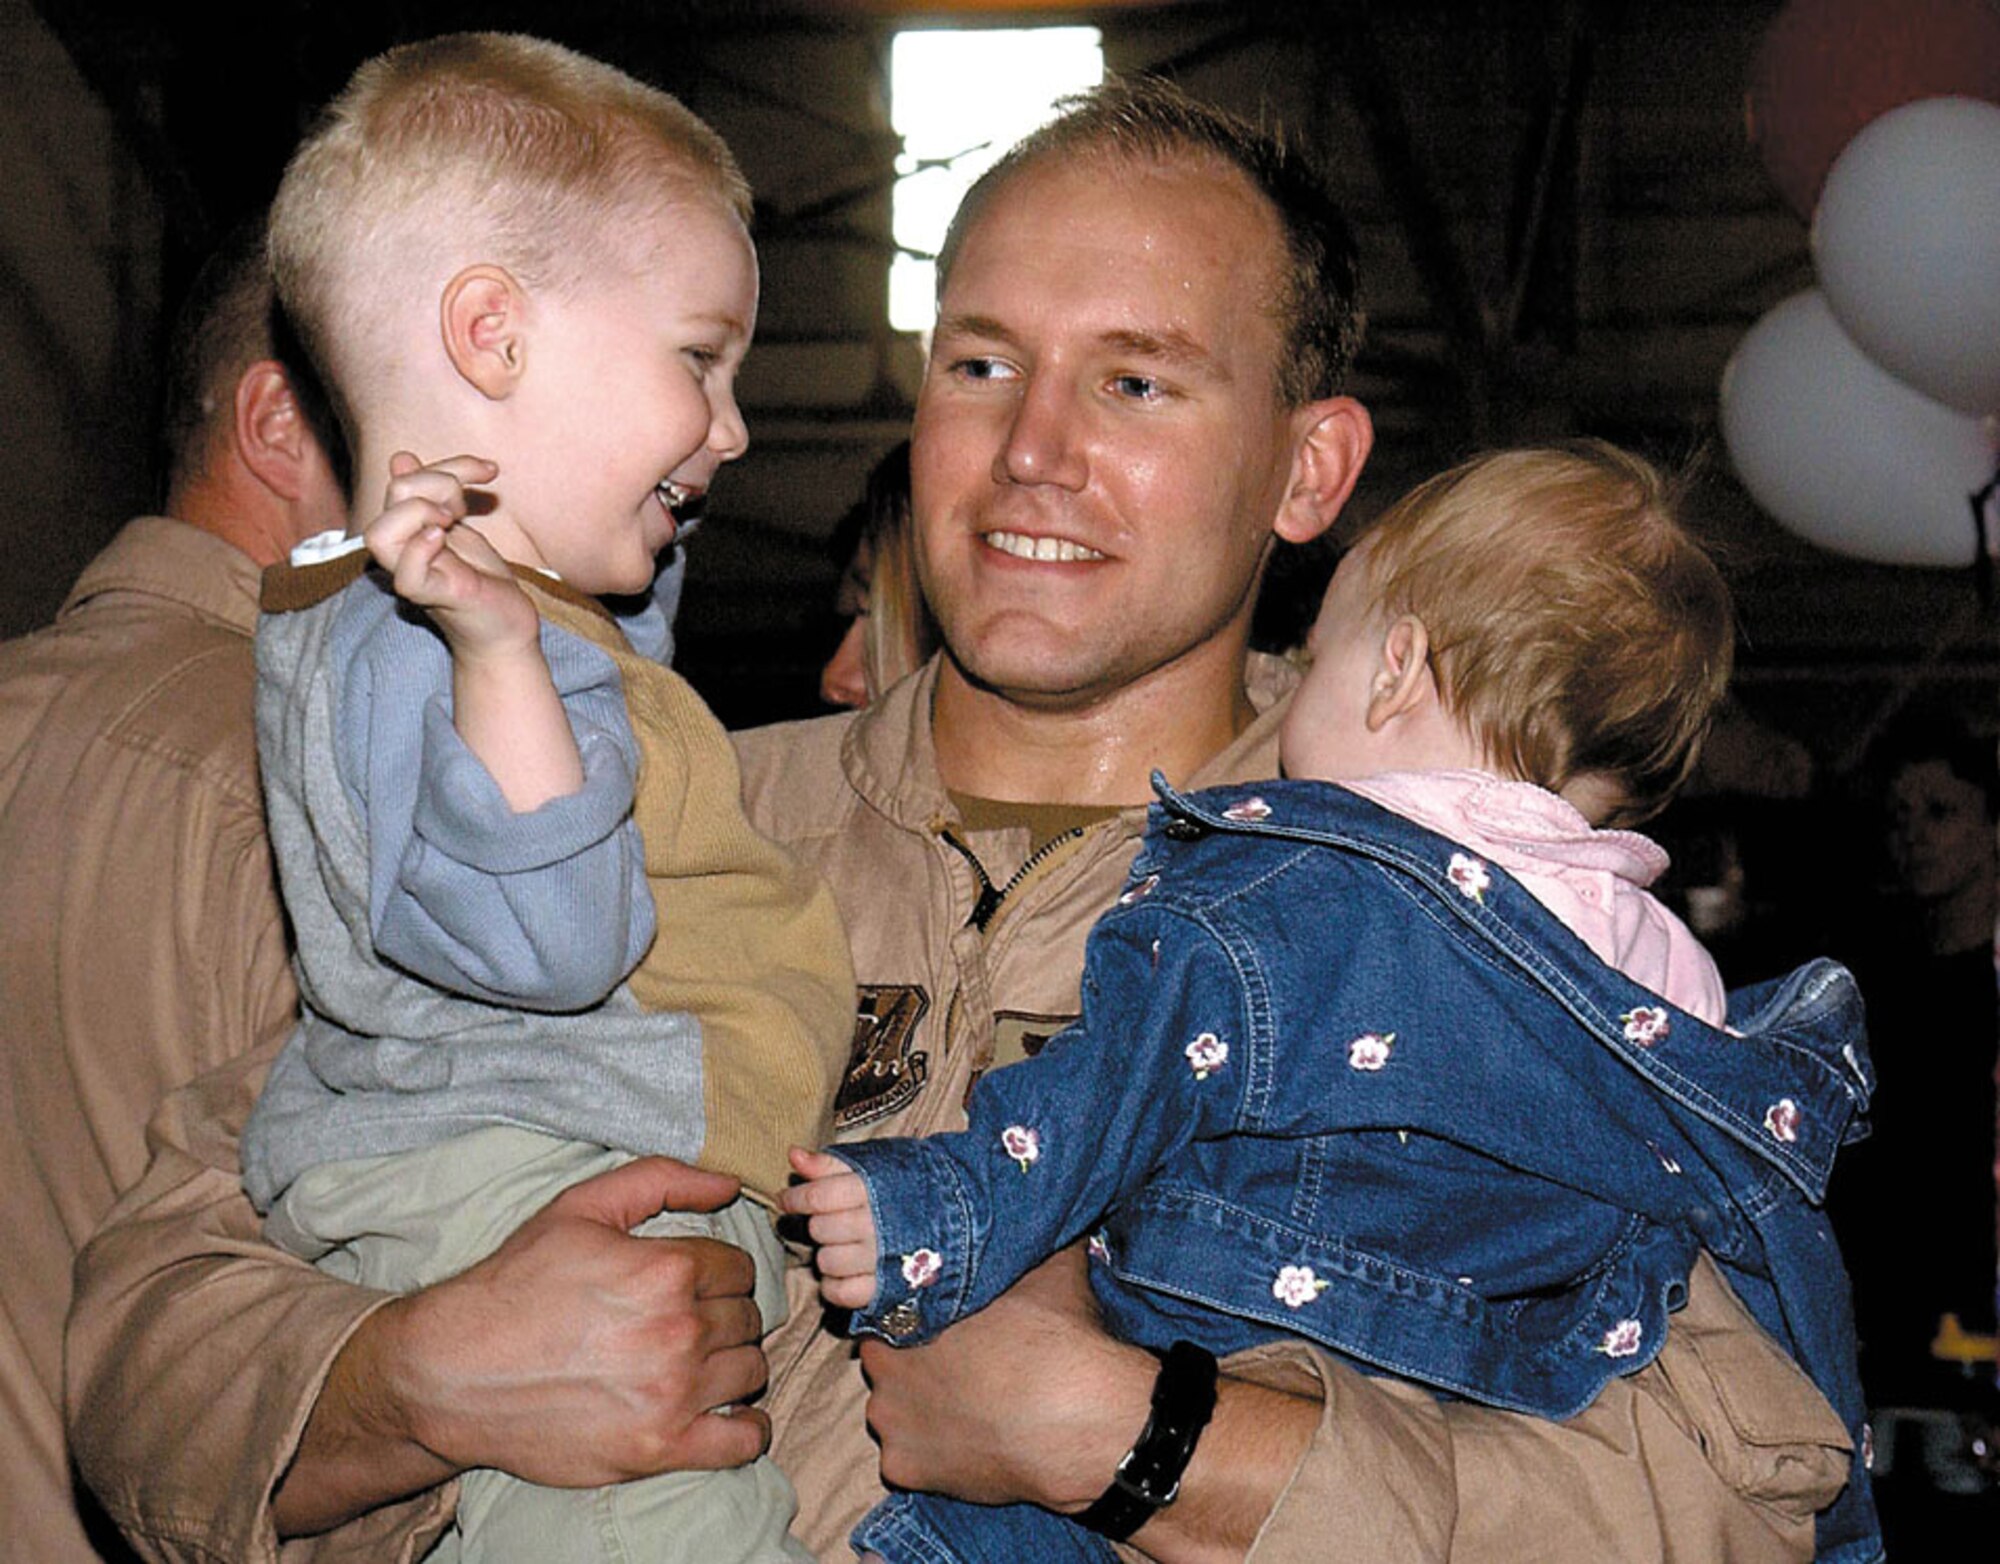 MINOT AIR FORCE BASE, N.D. -- Capt. Gary Berger, a 23rd Bomb Squadron electronic warfare officer, is welcomed home from serving in Operation Iraqi Freedom by his son, Vaughn, and his daughter, Ava.  (U.S. Air Force photo by Airman Alicia M. Sarkkinen)